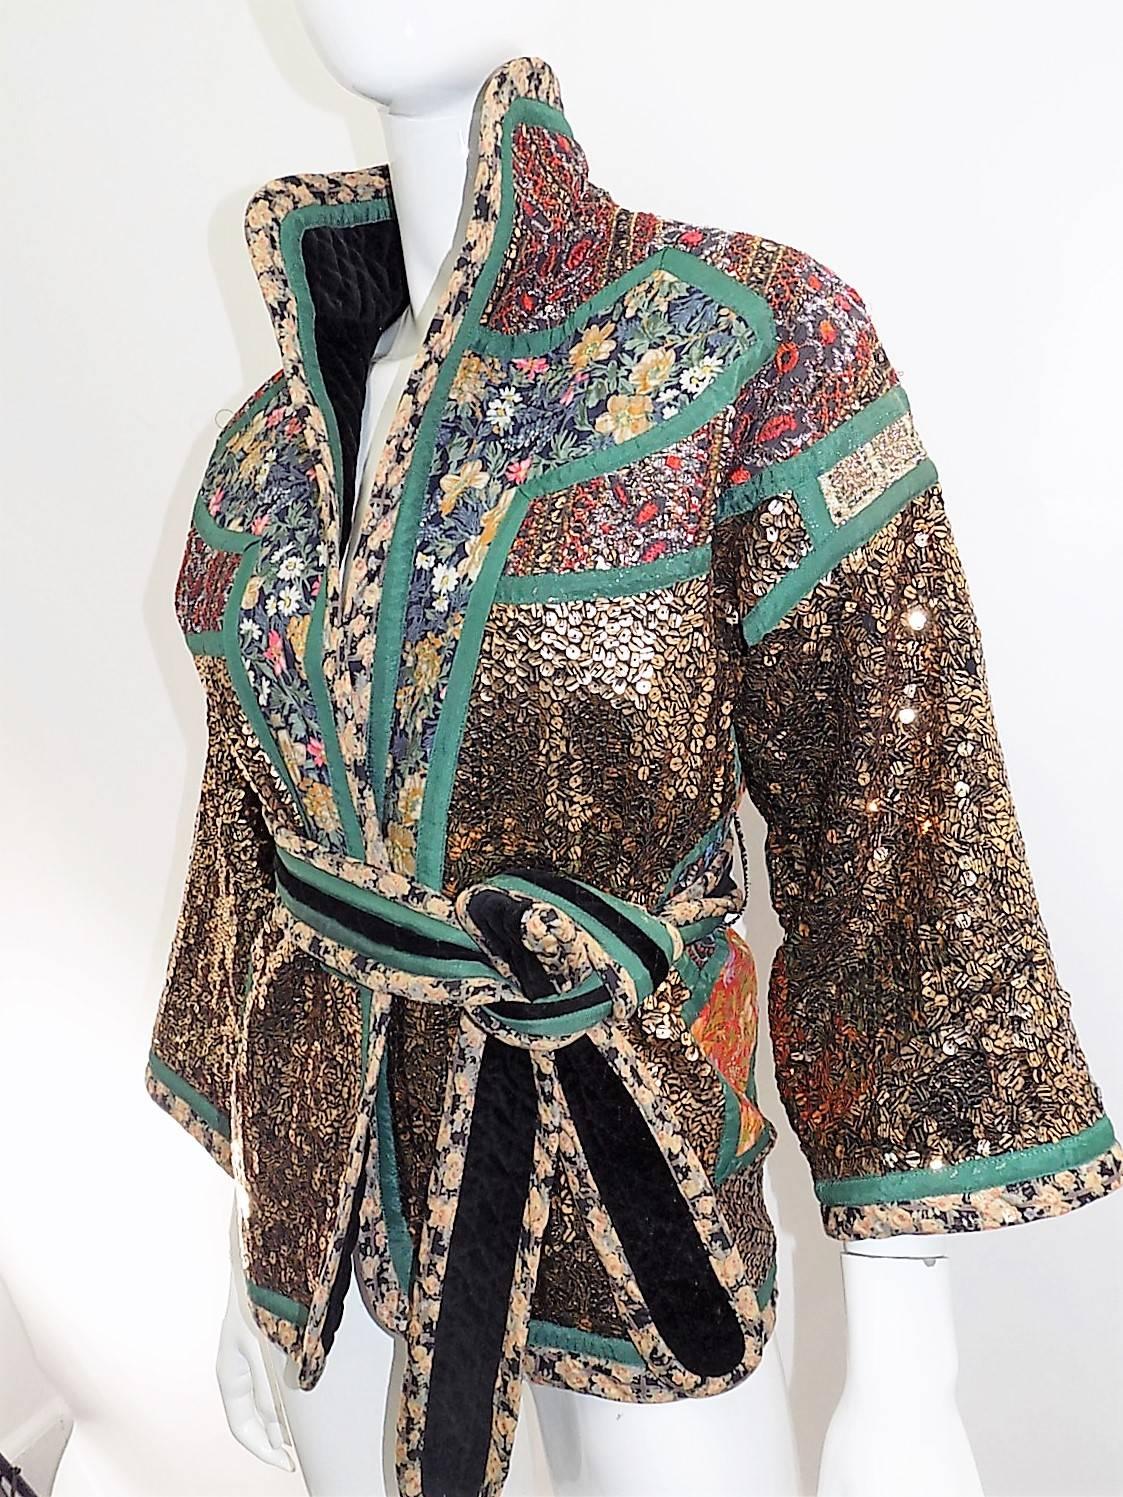 Truly spectacular! Koos Van Den Akker rare evening sequin gold brocade smoking jacket coat.  Every piece of fabric is  so carefully chosen. from golden sequin with black stripe trough, to brocade, lace , embroidery with silver and gold,  to vintage 